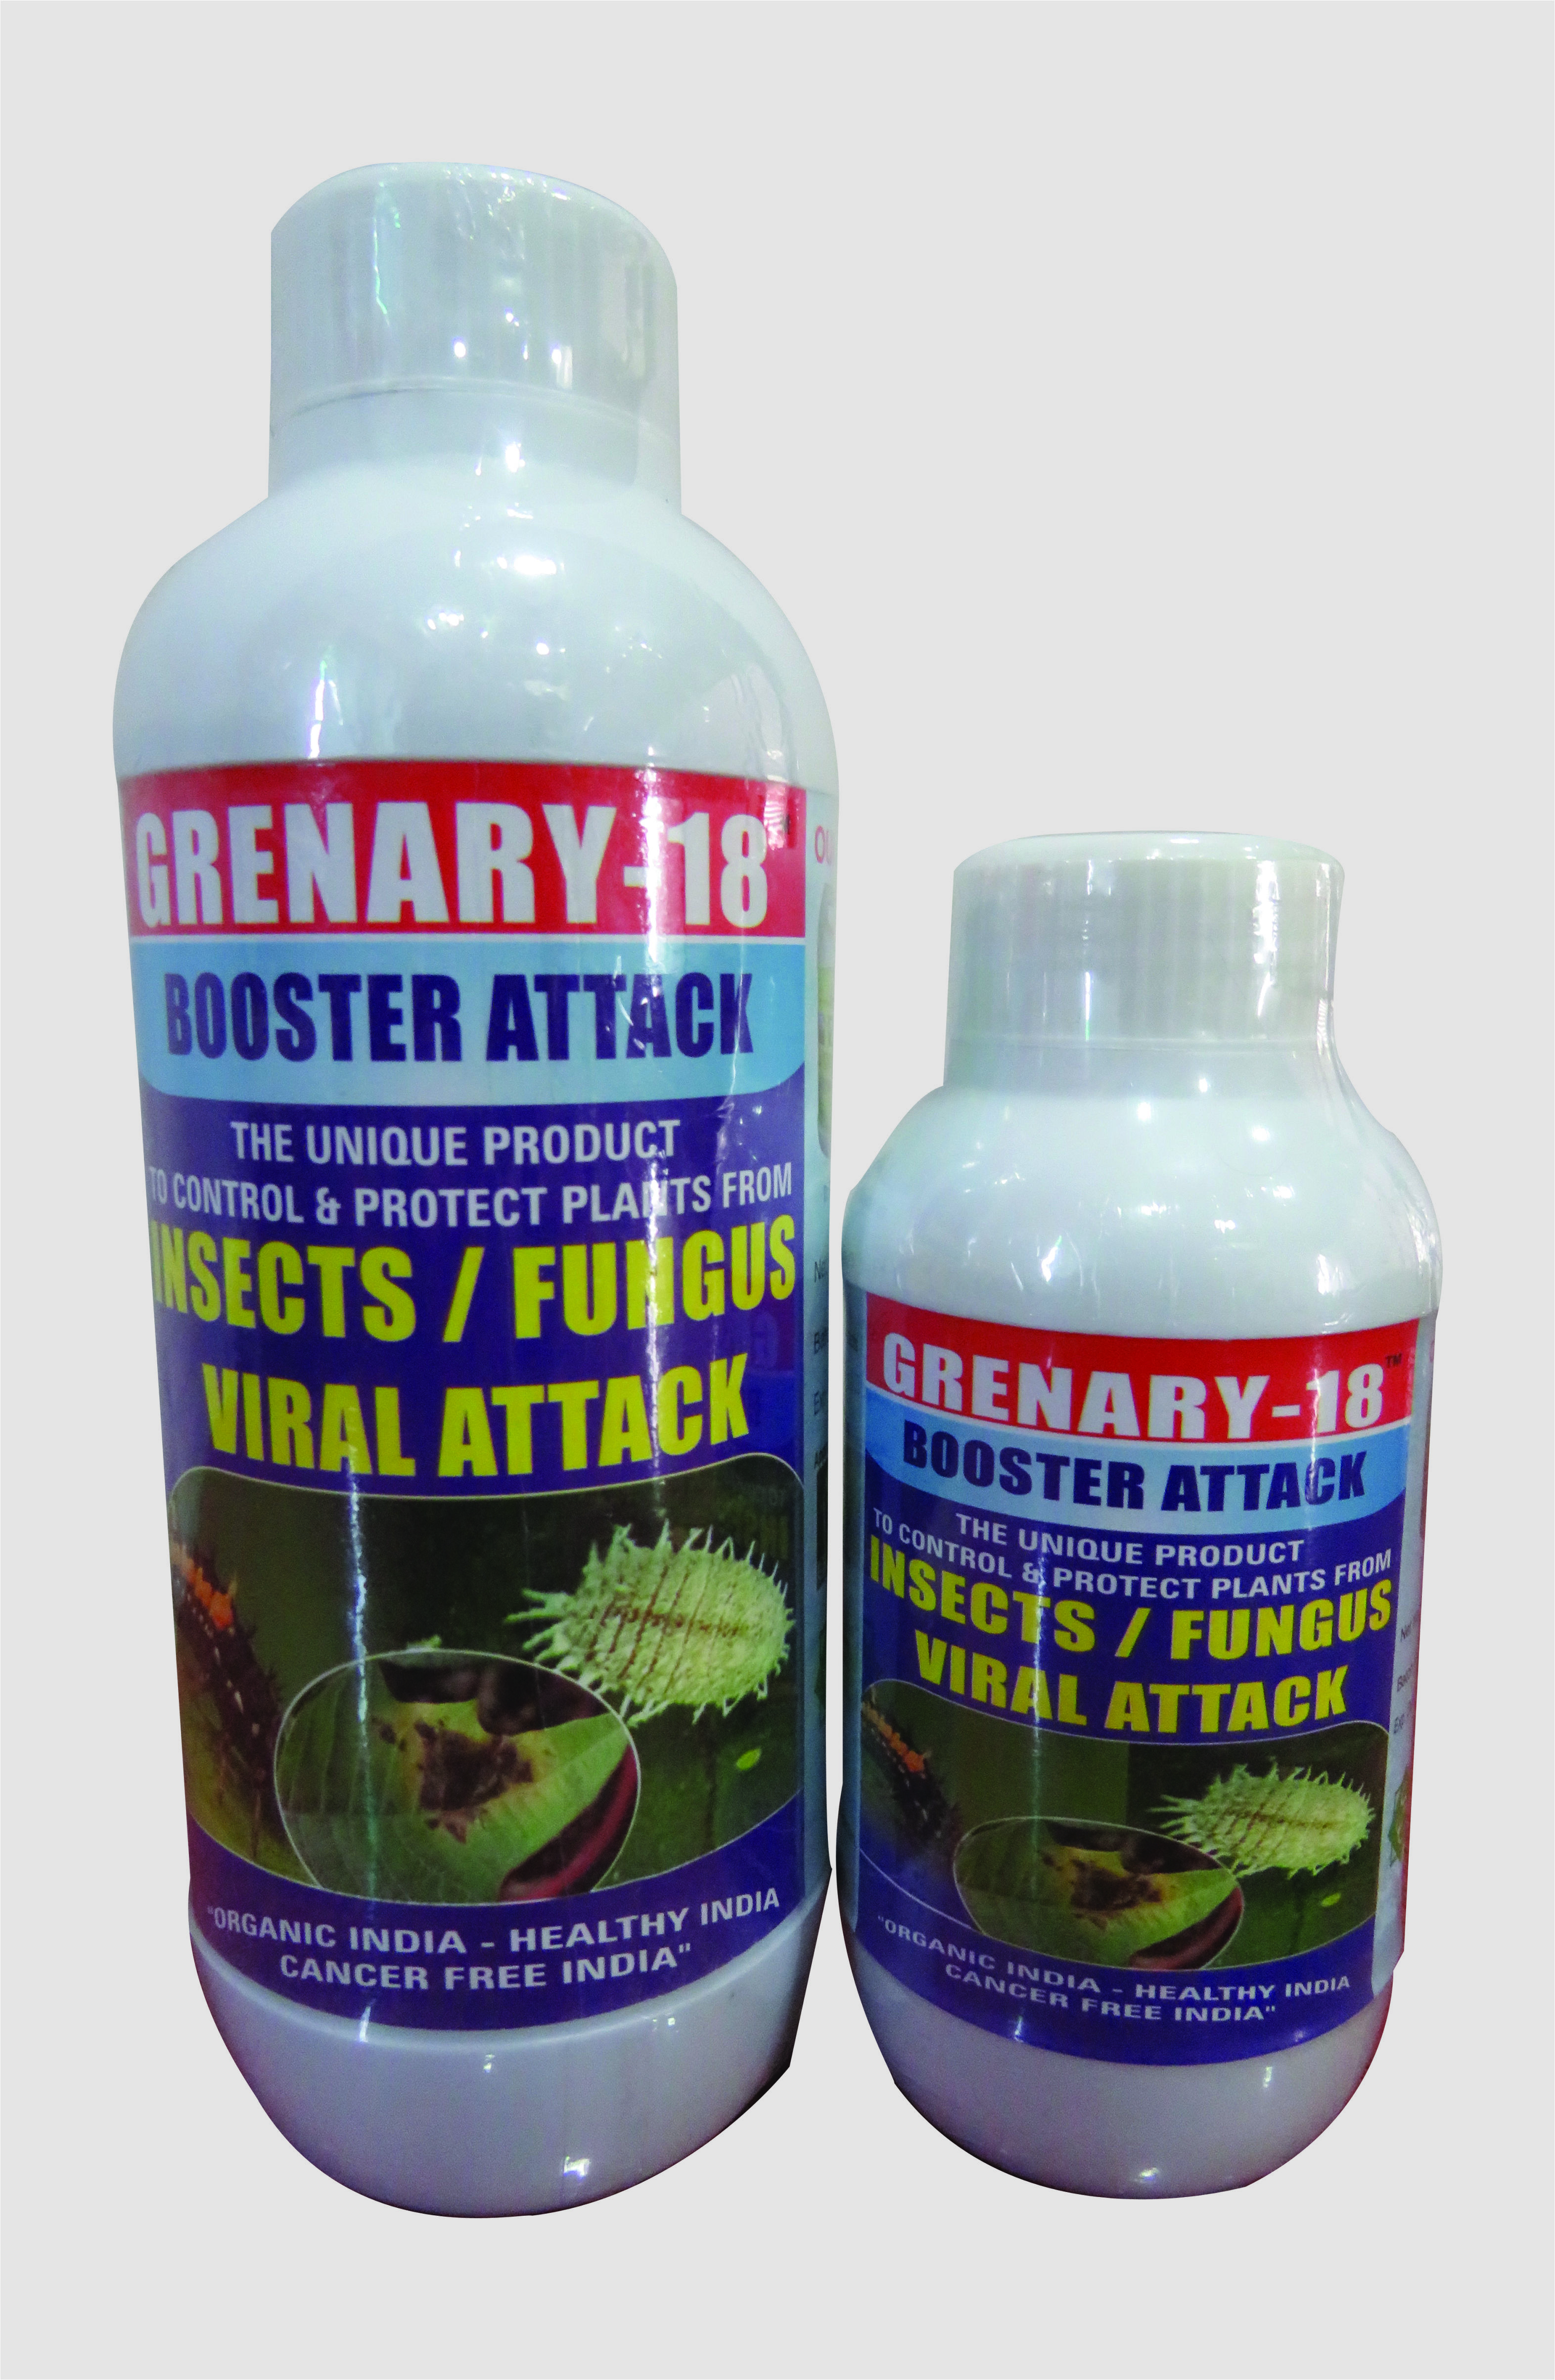 Grenary-18 Booster Attack Fungicides